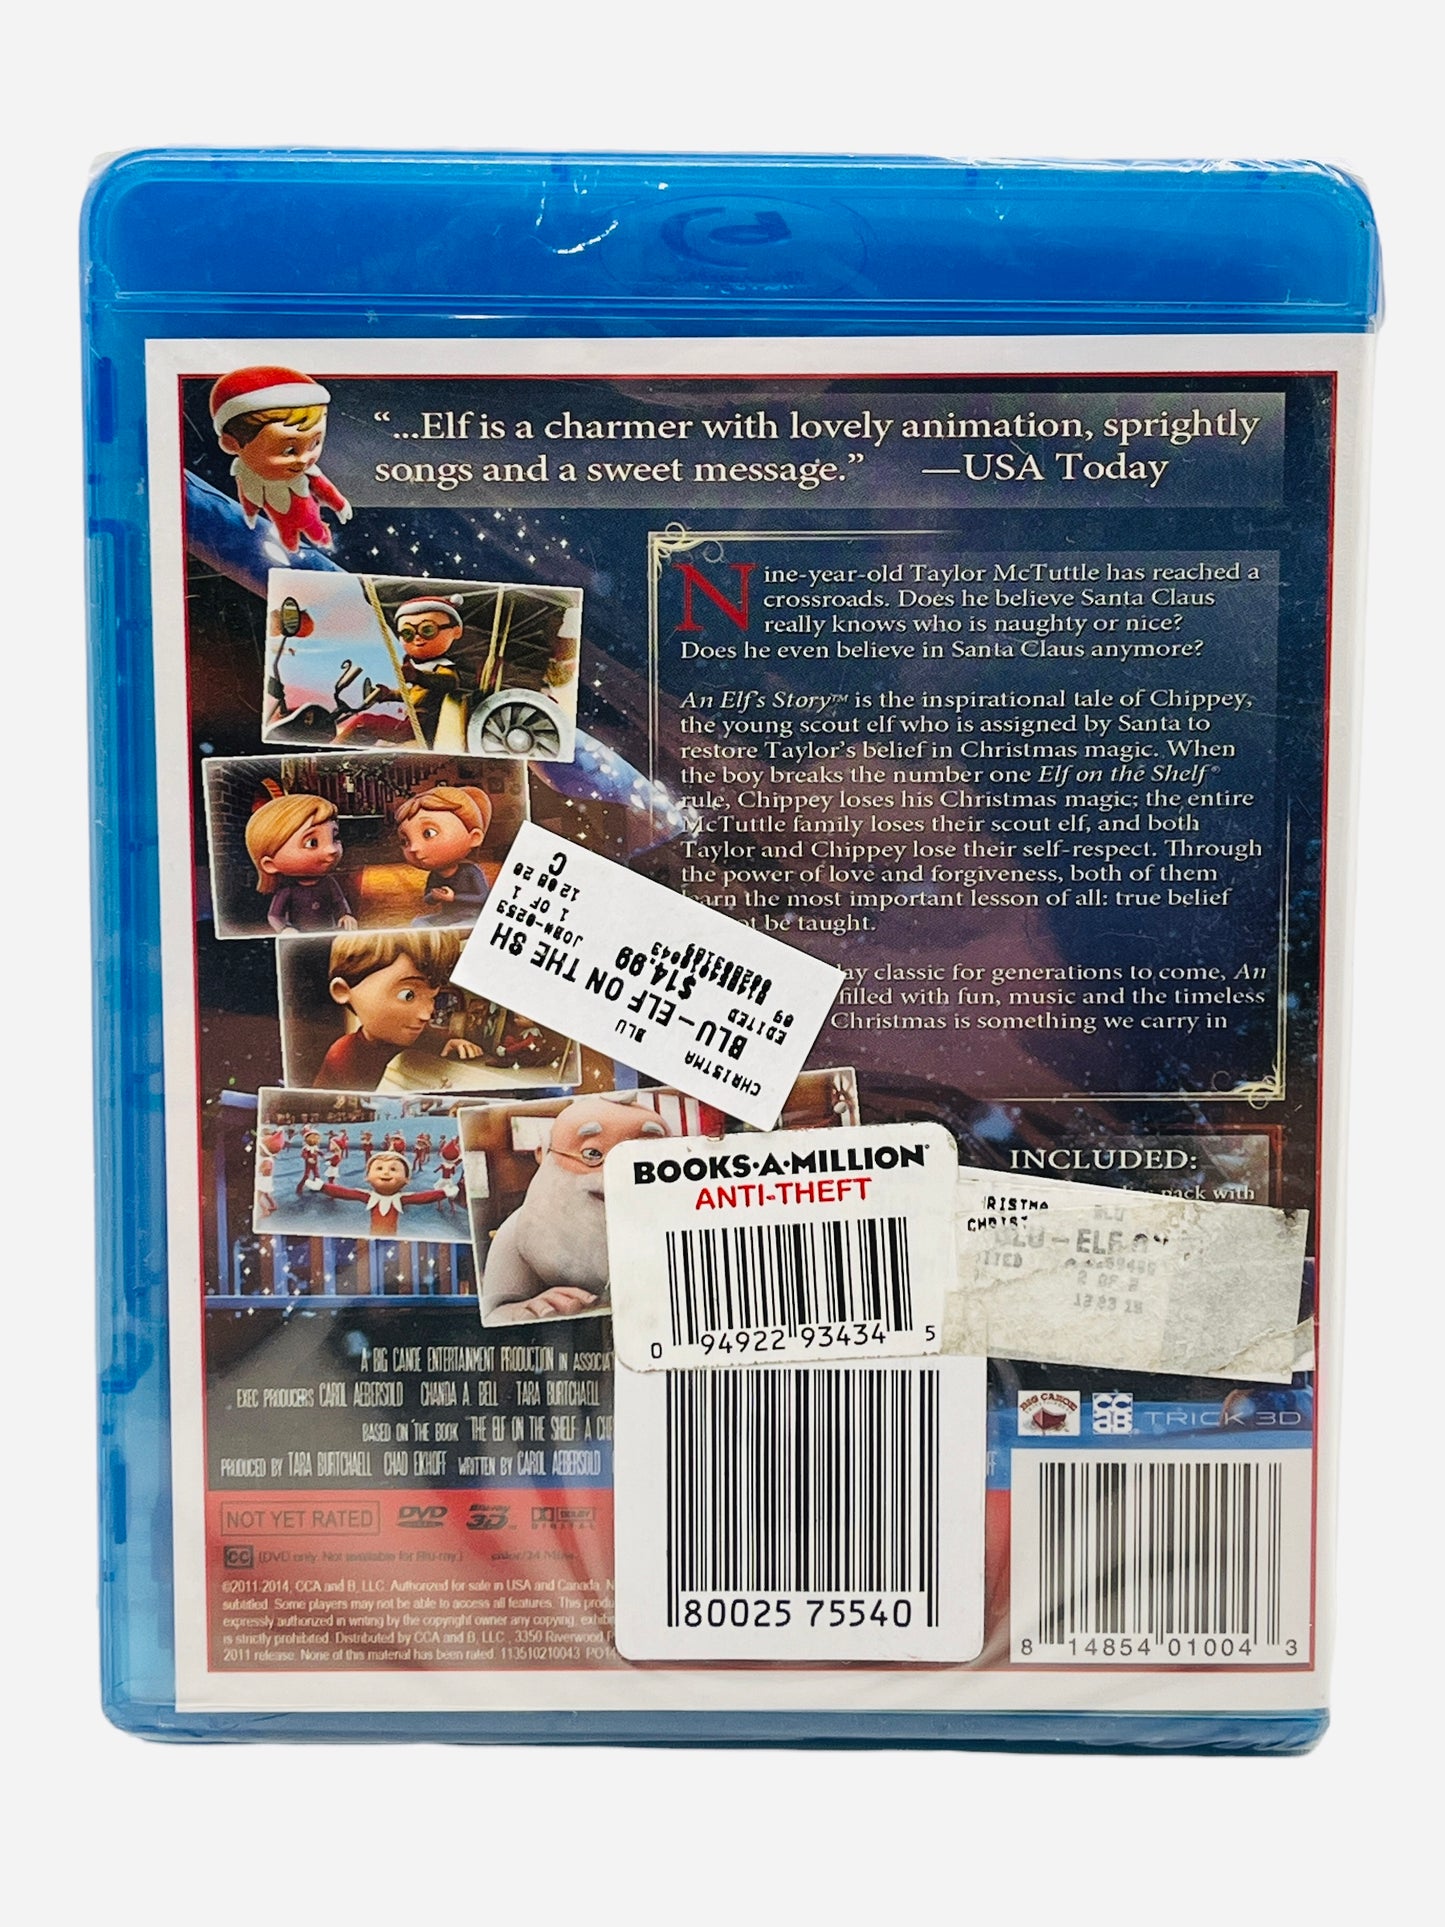 Elf on A Shelf Presents An Elf's Story Blu-Ray and Dvd